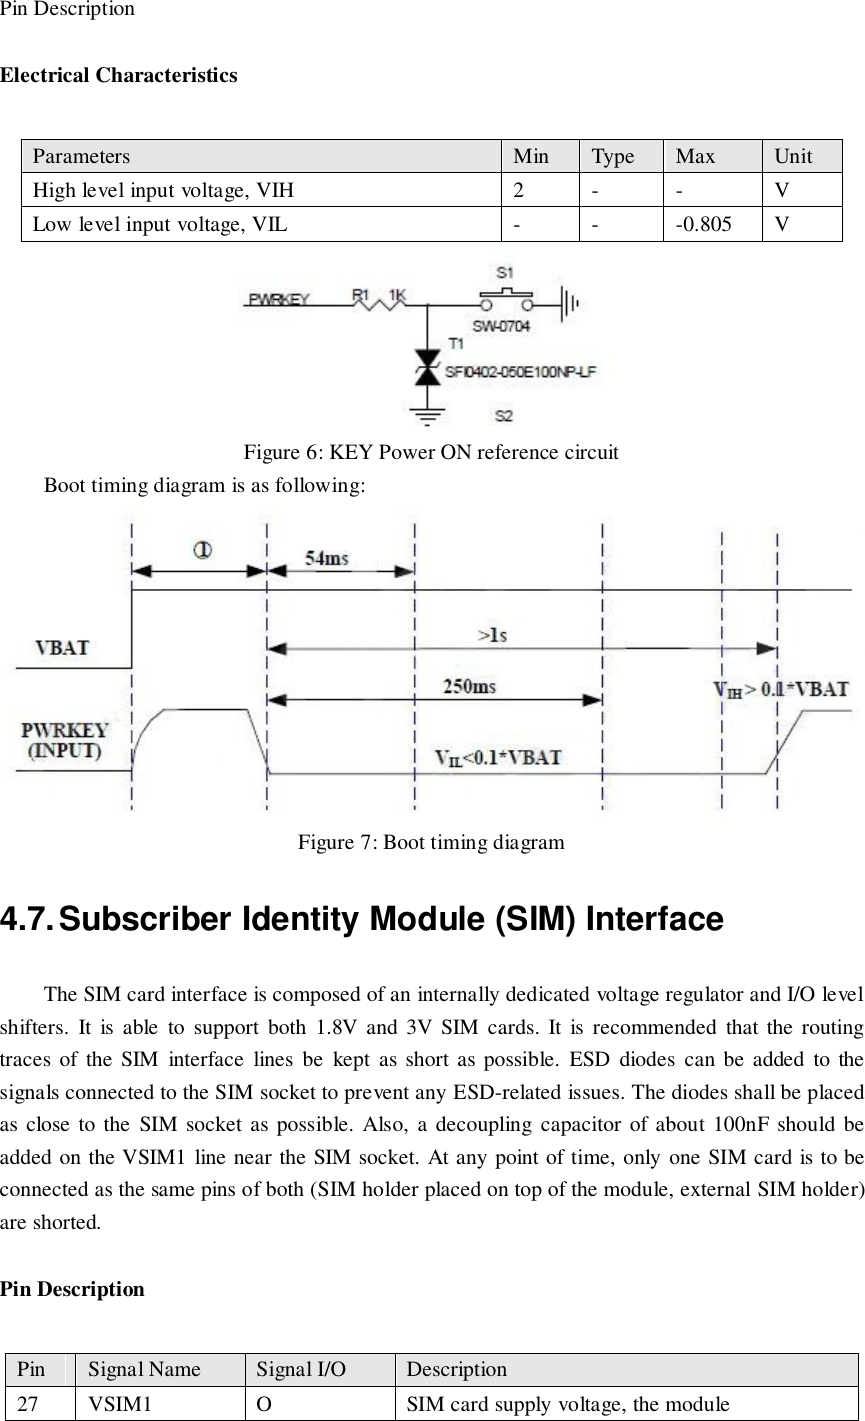 Pin Description Electrical Characteristics  Figure 6: KEY Power ON reference circuit Boot timing diagram is as following:                                                     Figure 7: Boot timing diagram 4.7. Subscriber Identity Module (SIM) Interface The SIM card interface is composed of an internally dedicated voltage regulator and I/O level shifters.  It  is  able  to  support  both  1.8V  and  3V  SIM  cards.  It  is  recommended  that  the  routing traces  of  the  SIM  interface  lines  be  kept  as  short as  possible.  ESD  diodes  can  be  added  to  the signals connected to the SIM socket to prevent any ESD-related issues. The diodes shall be placed as close  to the  SIM socket as possible.  Also, a decoupling capacitor of about 100nF should be added on the VSIM1 line near the SIM socket. At any point of time, only one SIM card is to be connected as the same pins of both (SIM holder placed on top of the module, external SIM holder) are shorted. Pin Description Parameters Min Type Max Unit High level input voltage, VIH 2 - - V Low level input voltage, VIL - - -0.805 V Pin Signal Name Signal I/O Description 27 VSIM1 O SIM card supply voltage, the module 